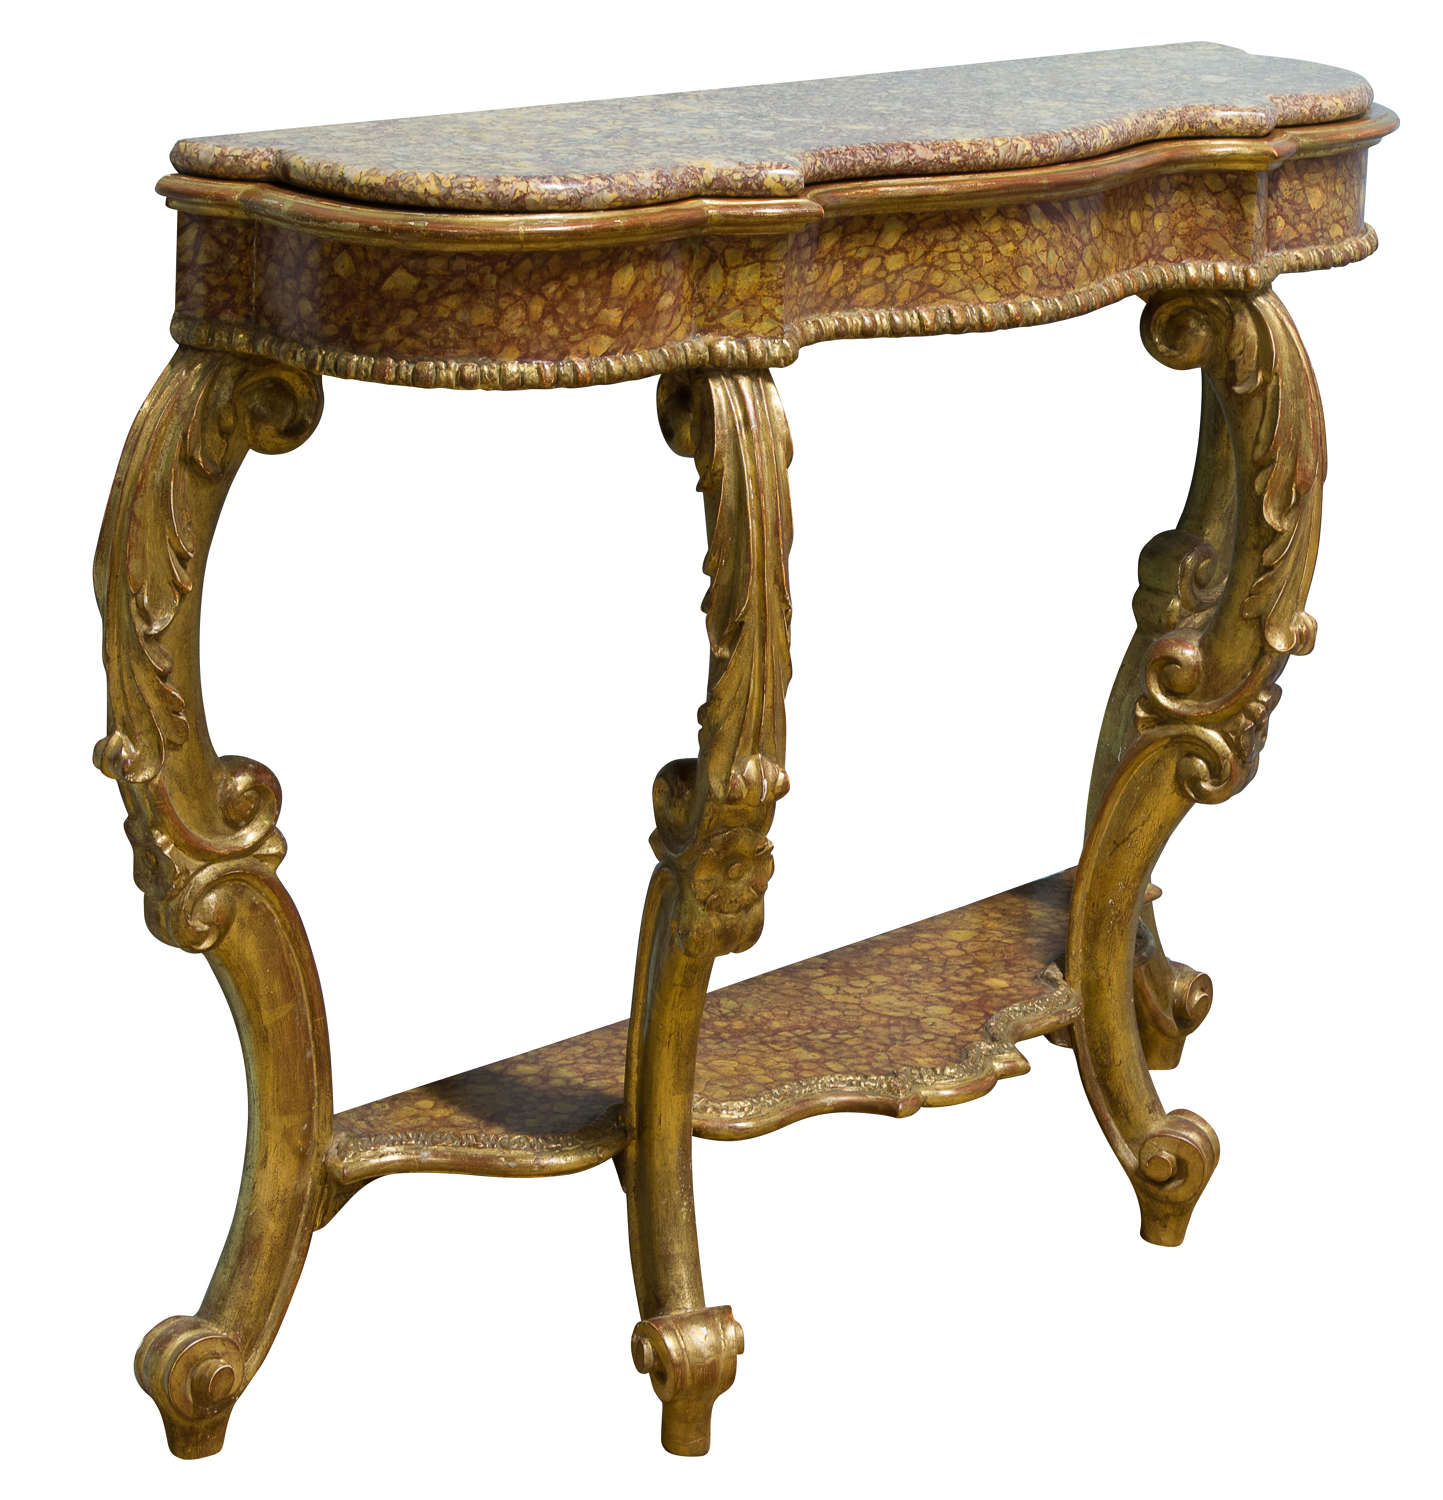 Italian carved giltwood console table c1770